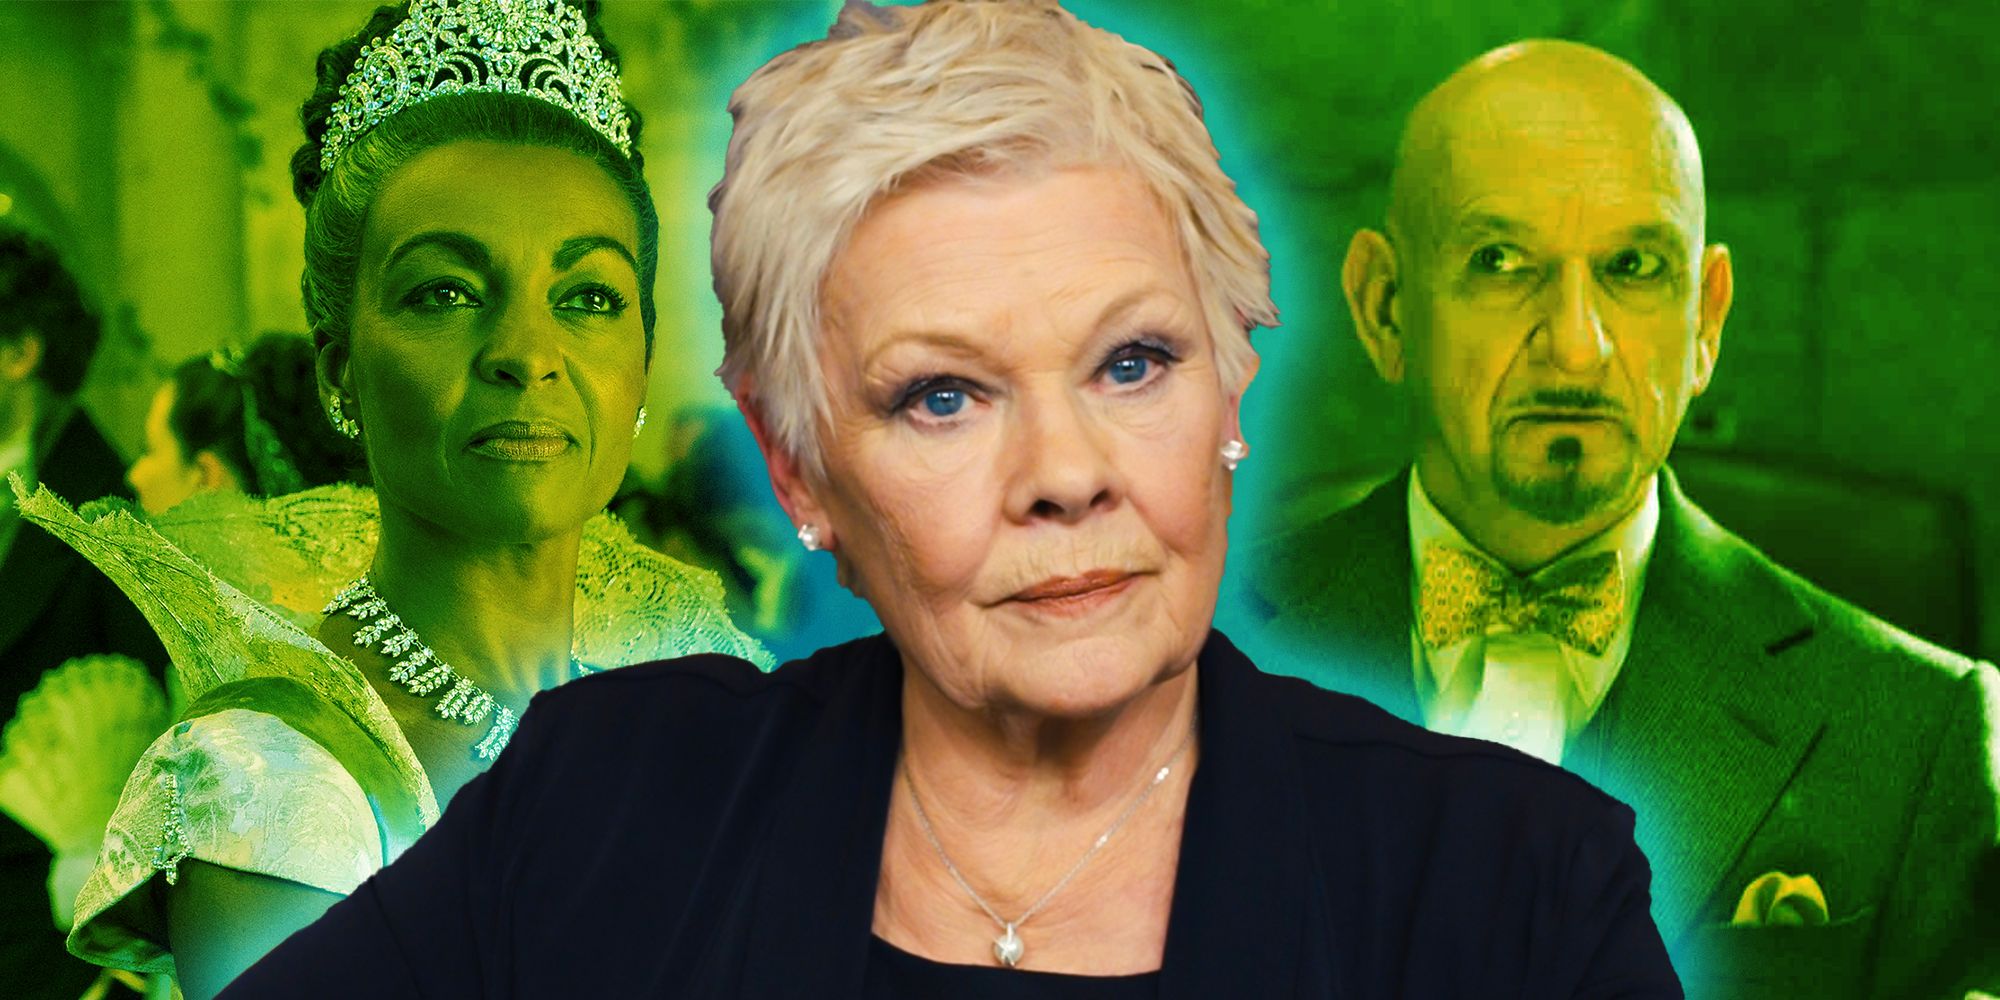 Collage of Judi Dench, Adjoa Andoh, and Ben Kingsley